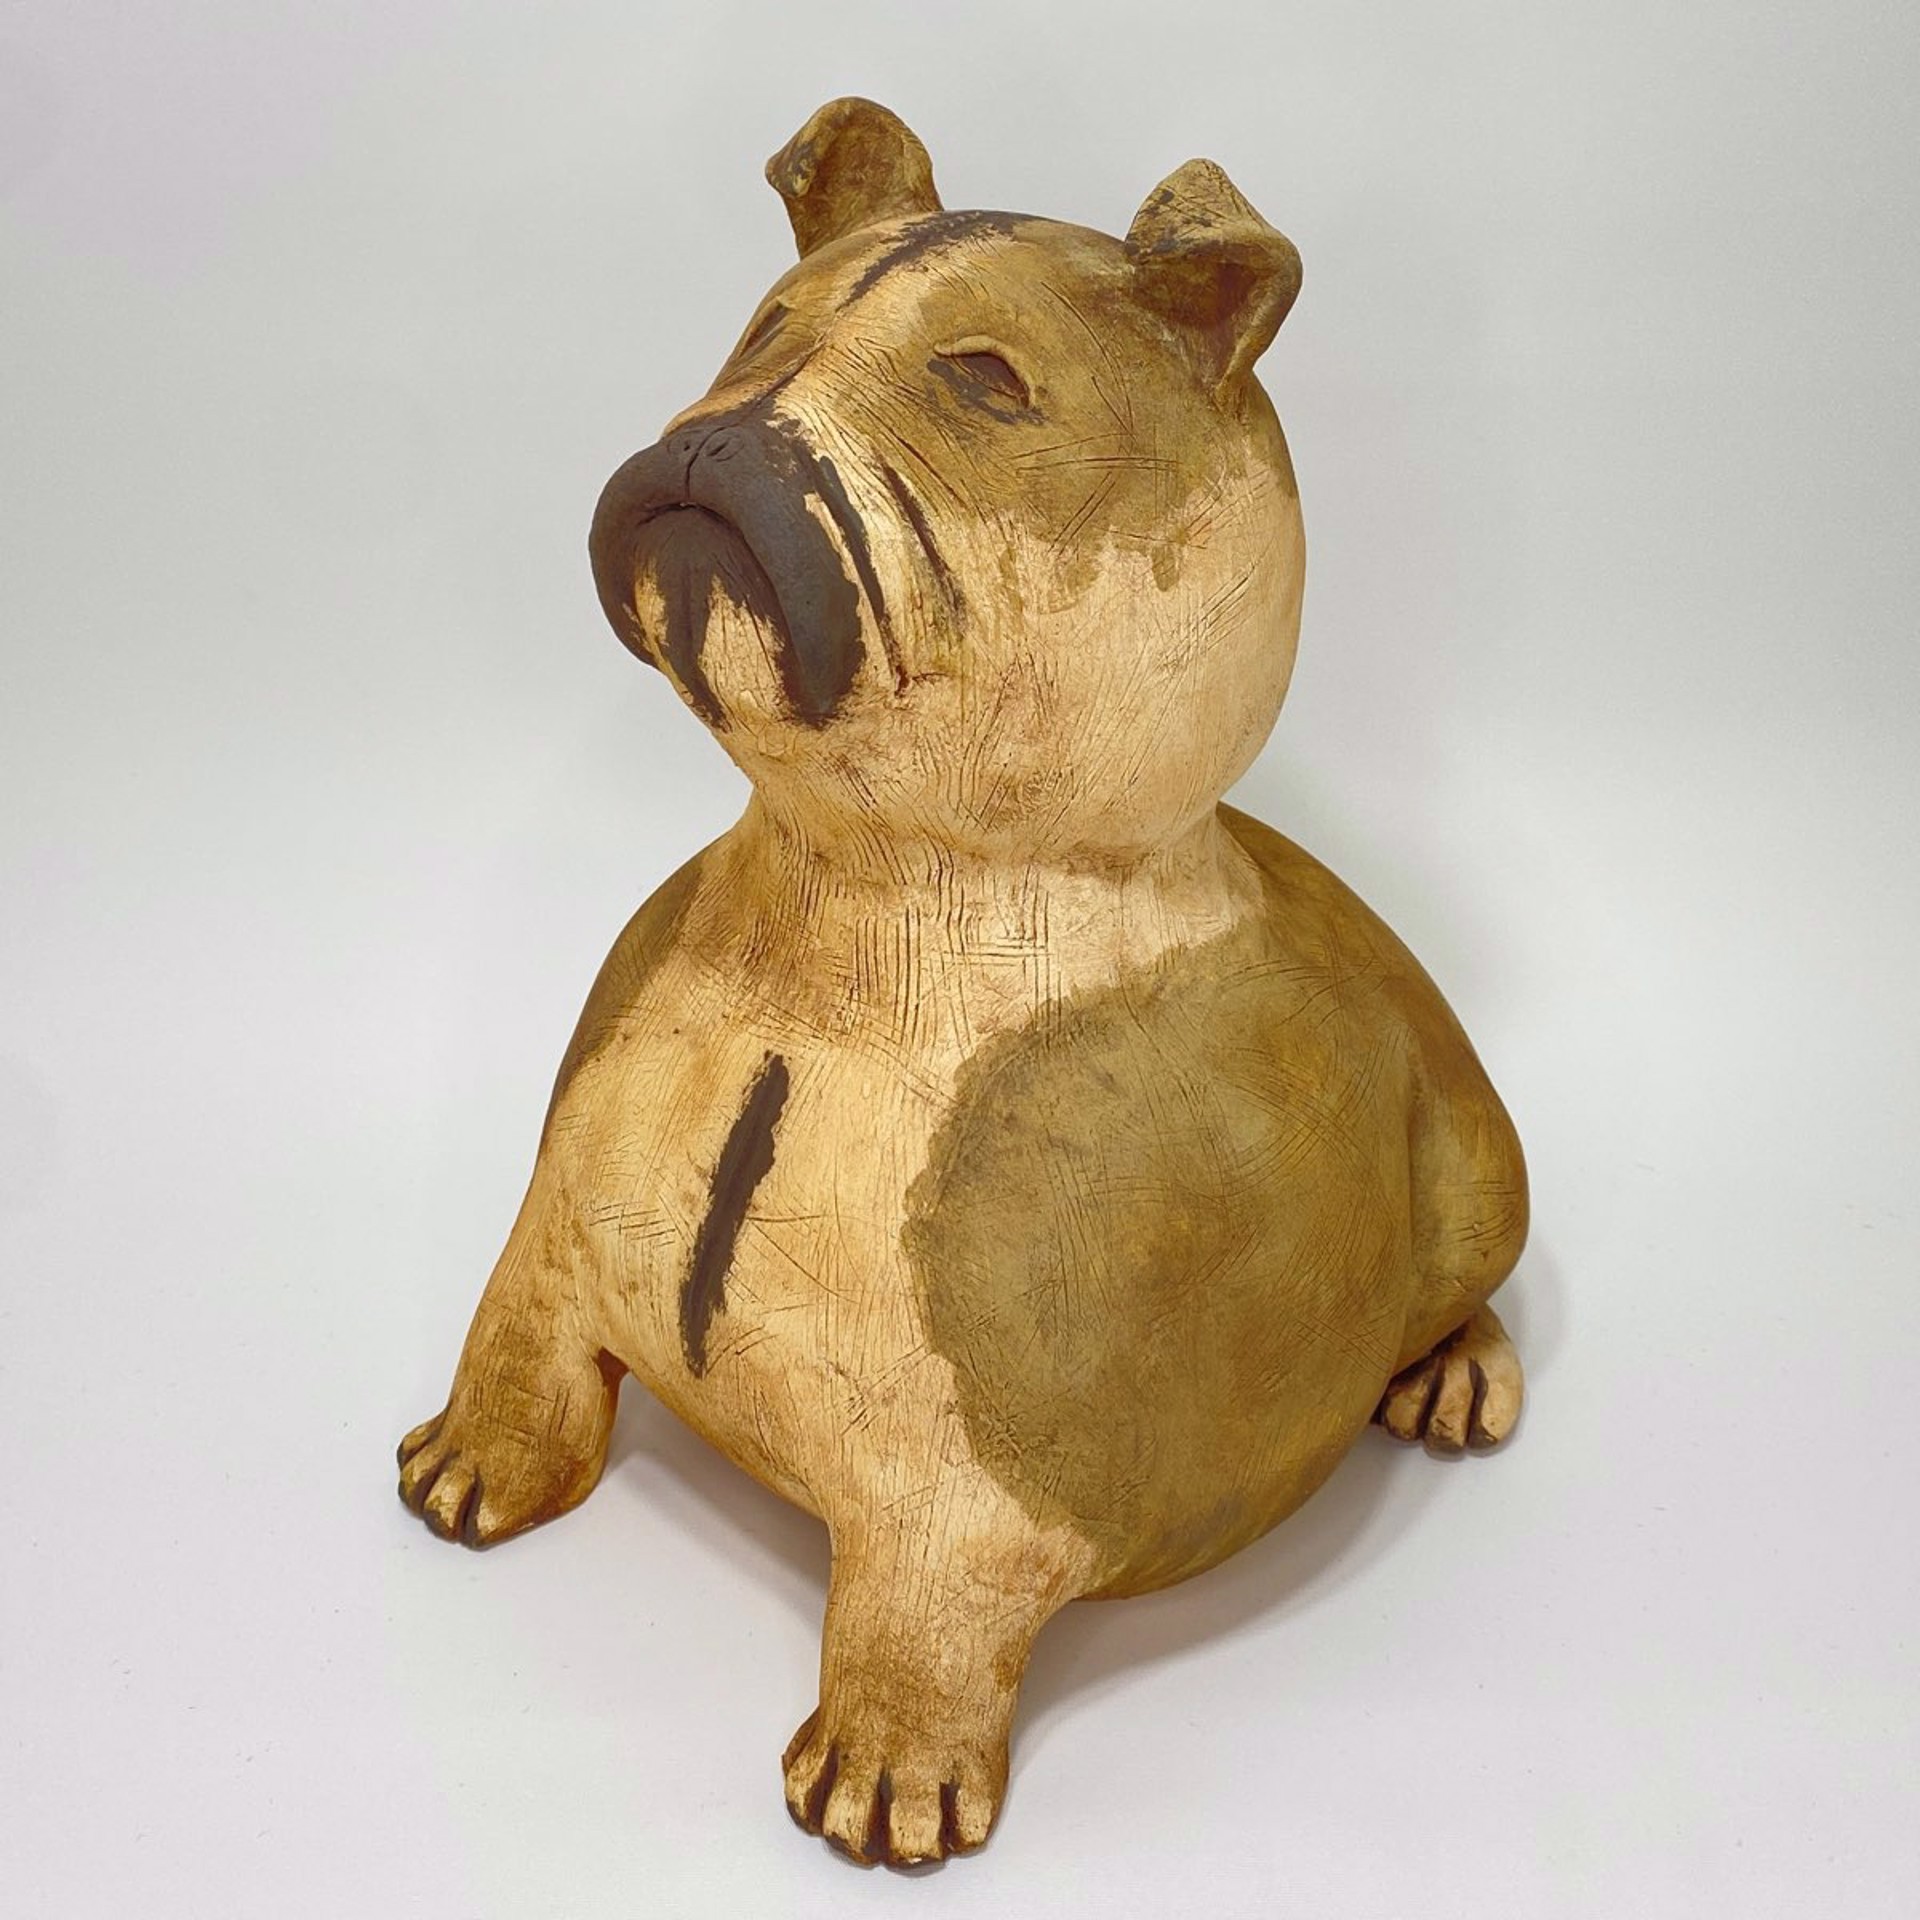 "Roofus" by Sue Morse by Art One Foundation